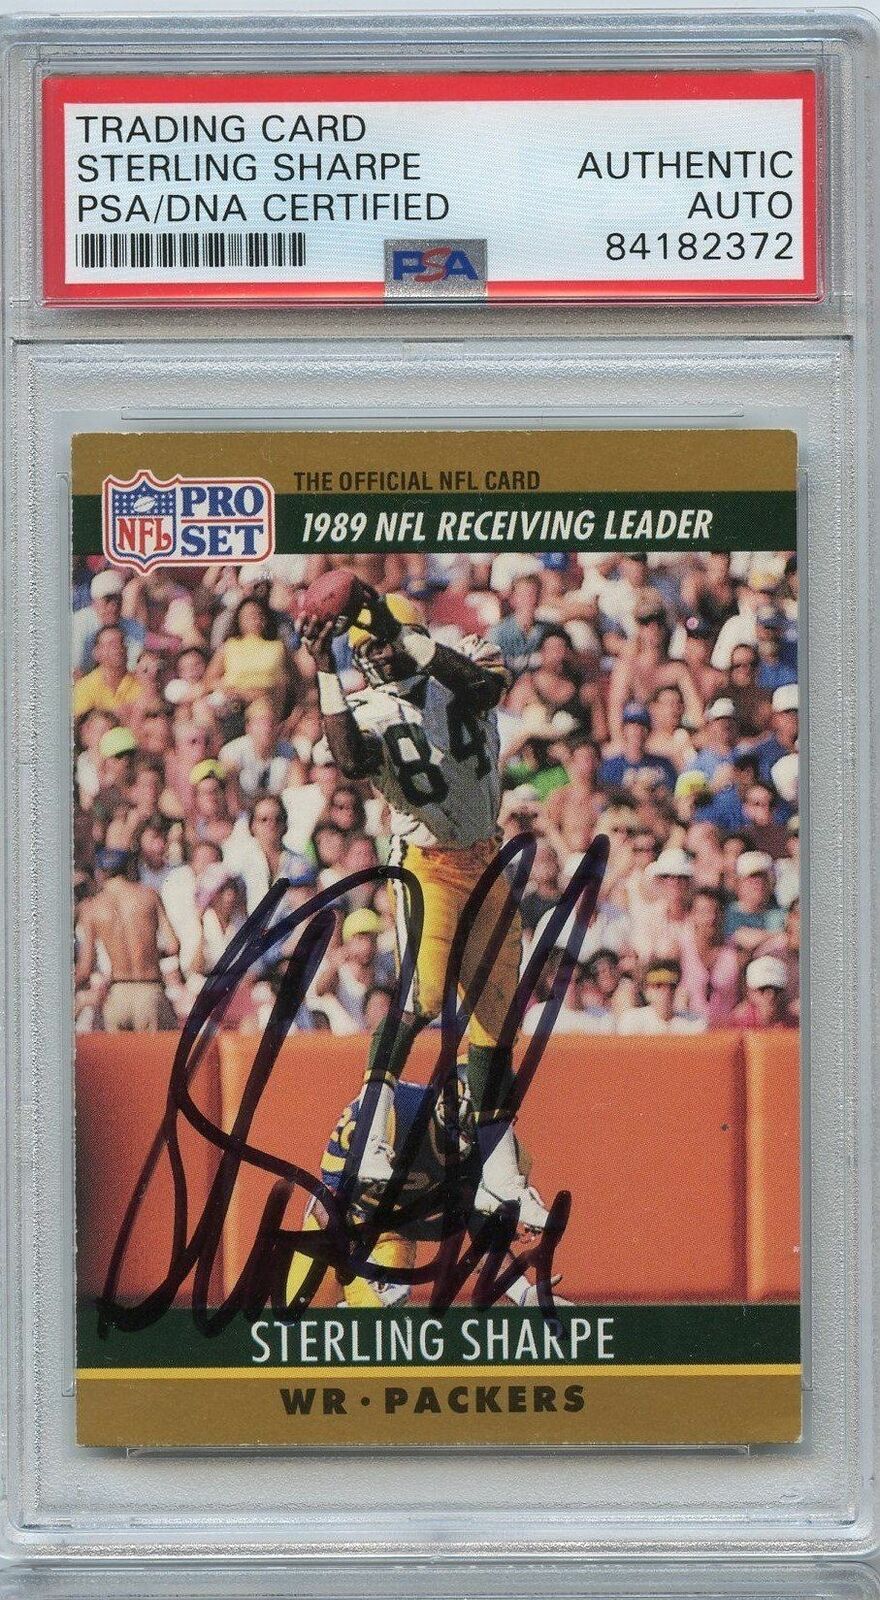 Sterling Sharpe 1990 NFL Pro Set AUTO card PSA Green Bay Packers Signed Image 2